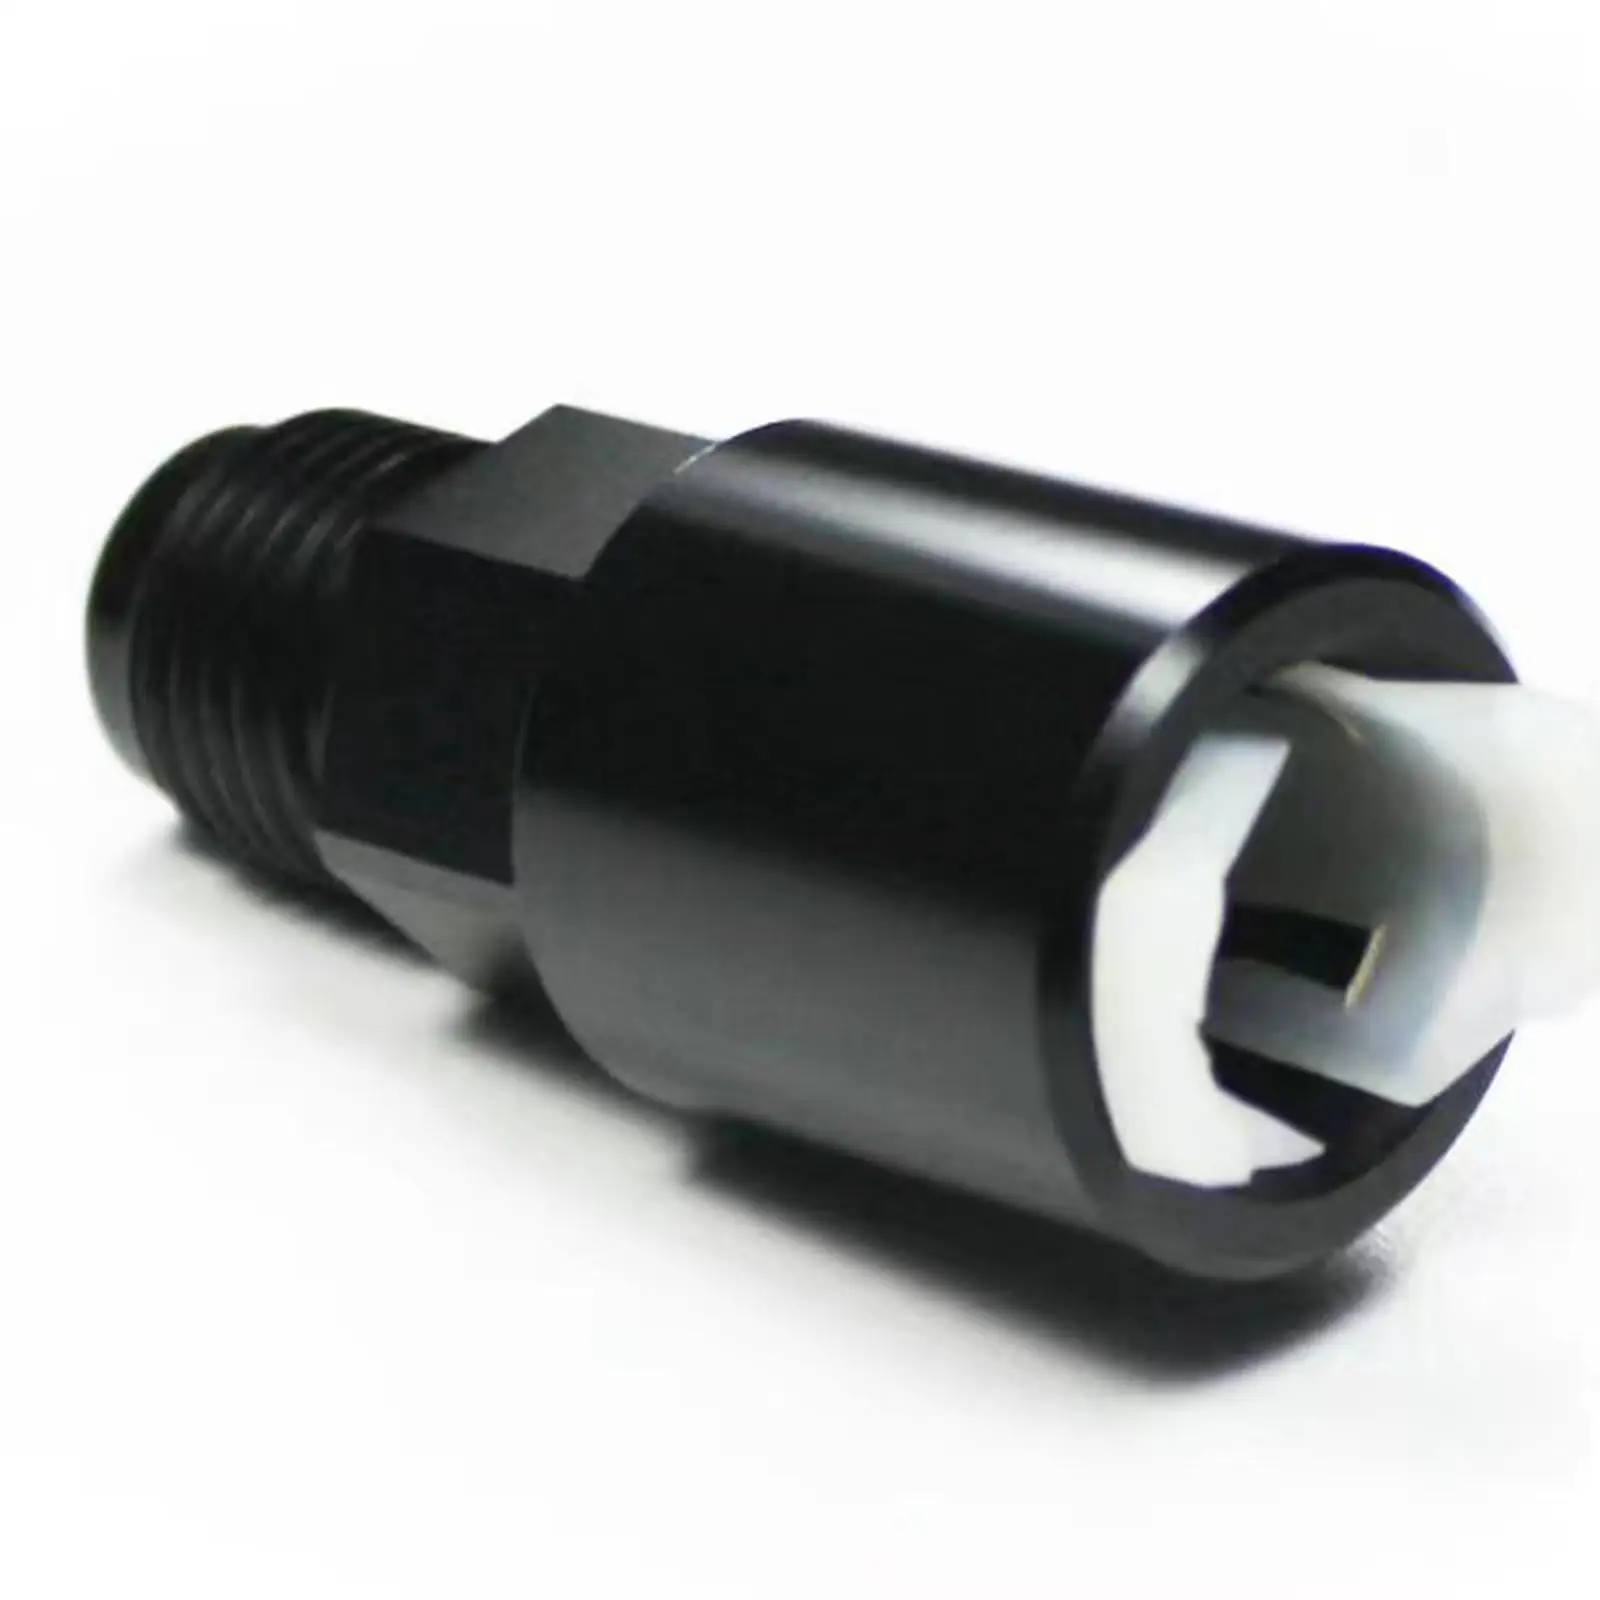 Fuel Adapter Fitting 6AN to 5/16 GM LS W/ Clip Female Black Fuel Distribution Pipe Joint for Gas Fuel Oil Coolant Air